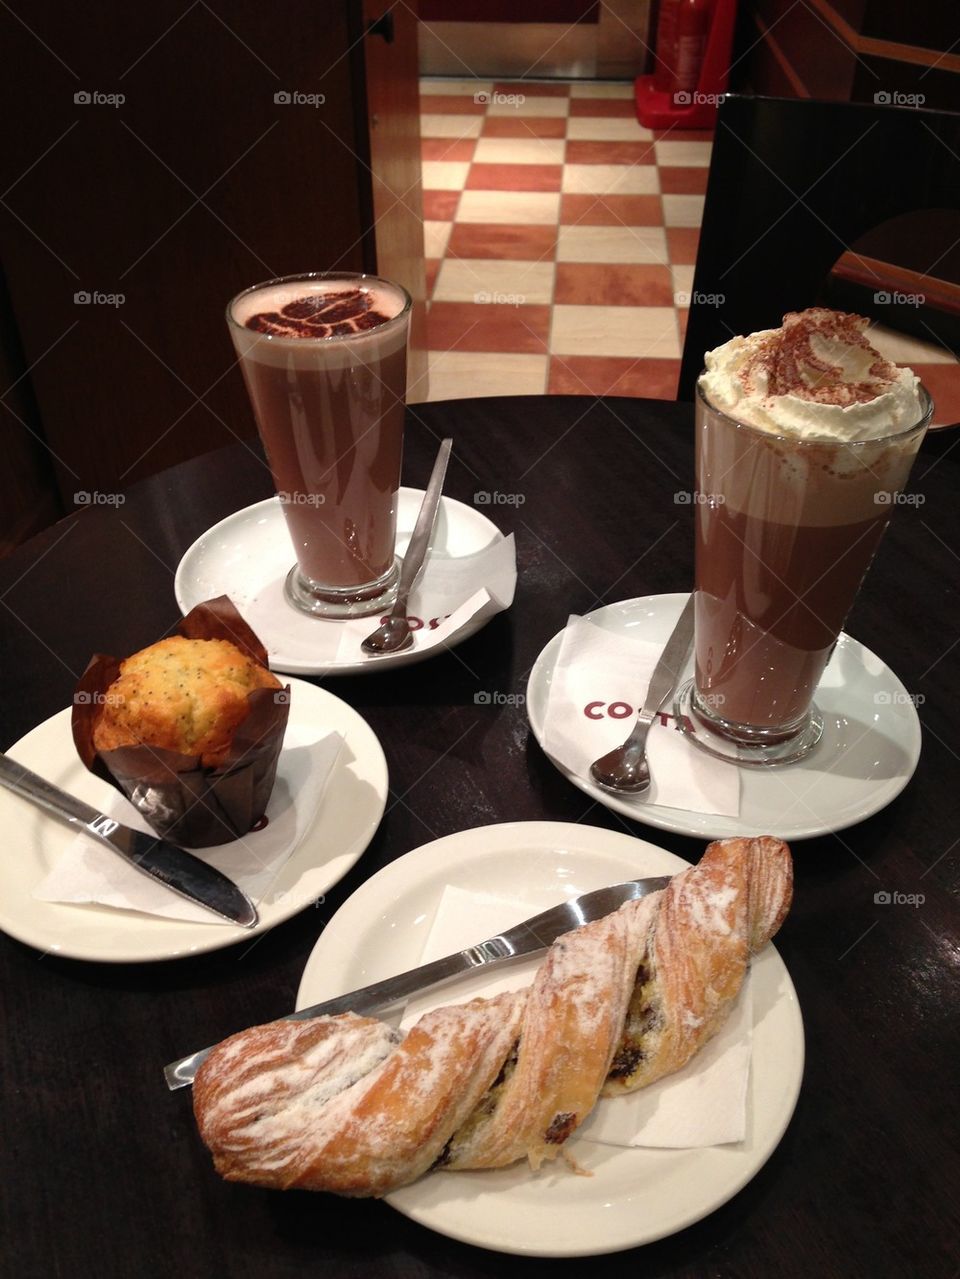 Hot chocolate and pastries